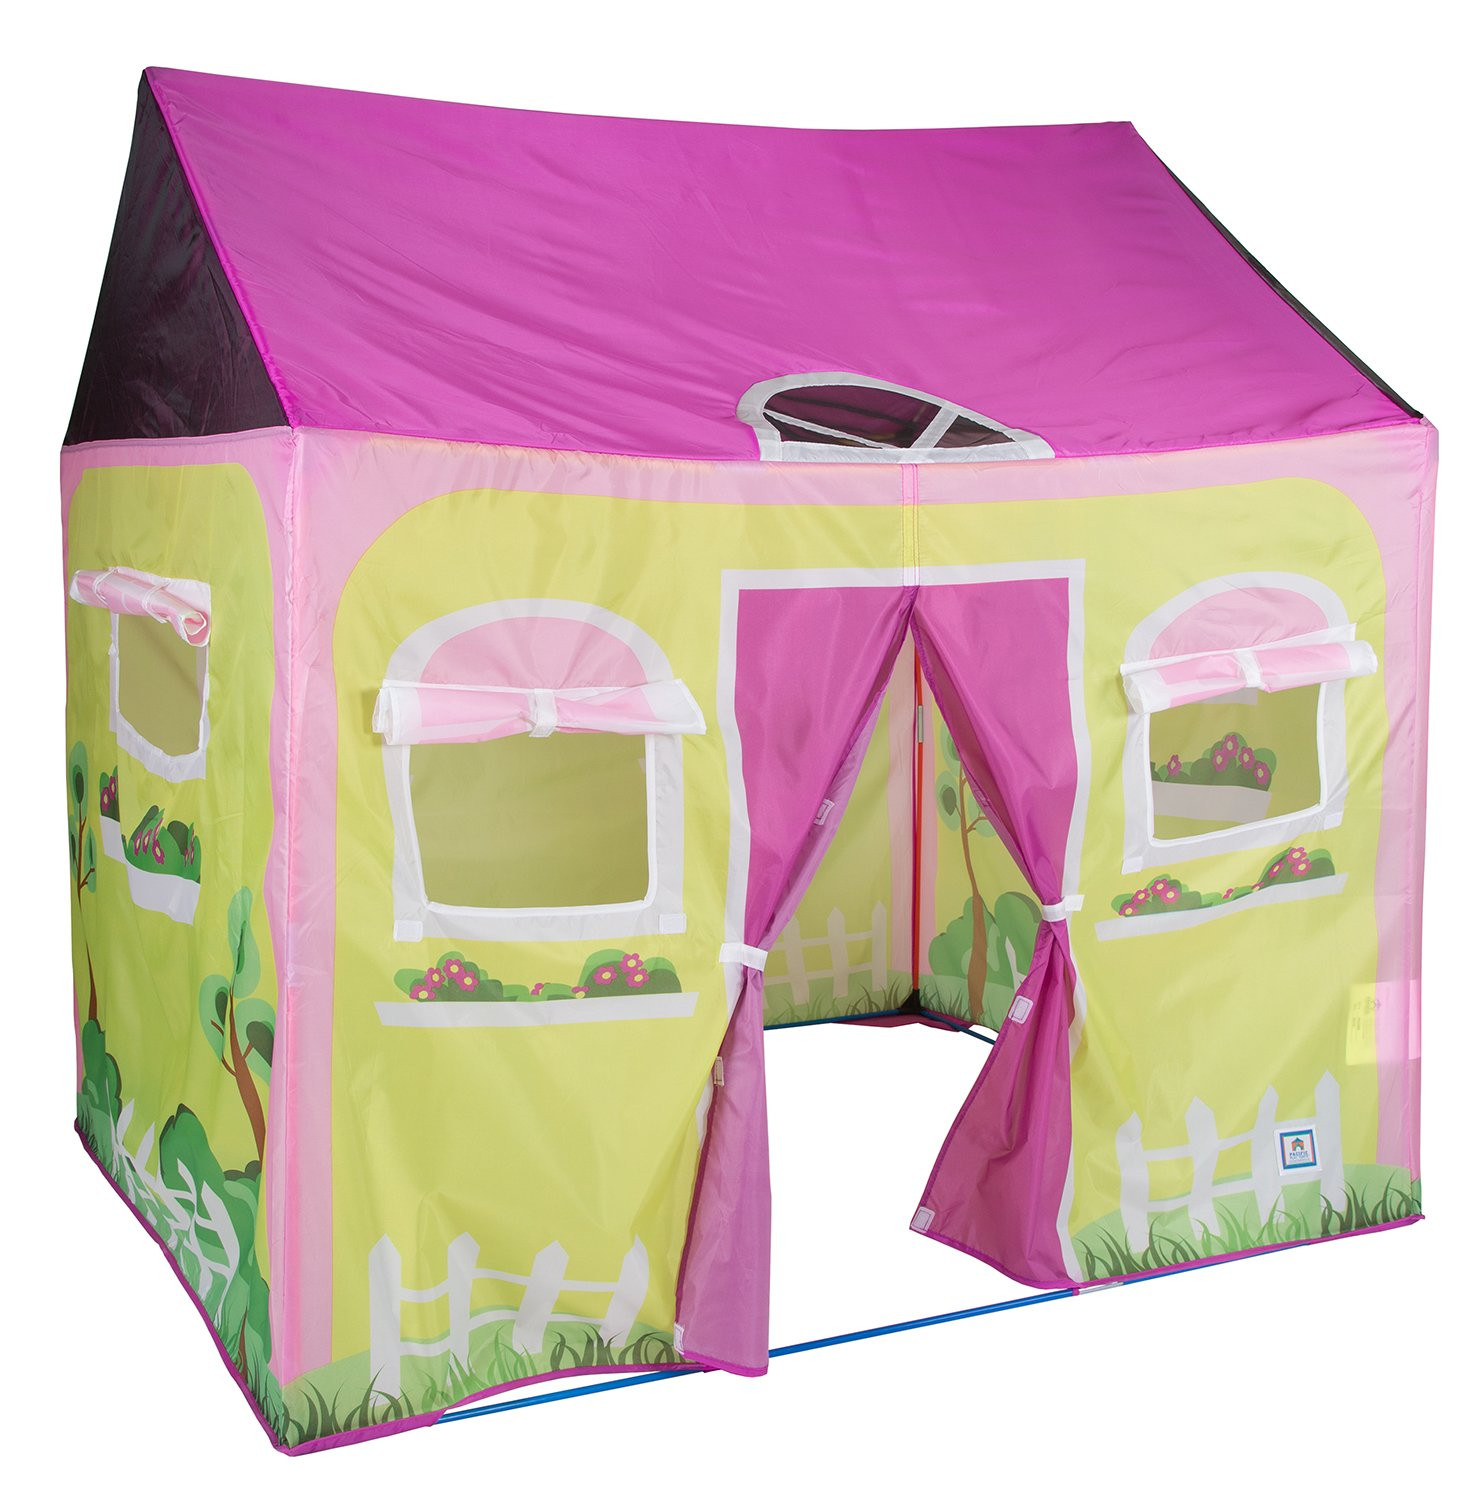 Kids Indoor Tent
 Kids Girls Play Tent Cottage Play House Playhouse Indoor